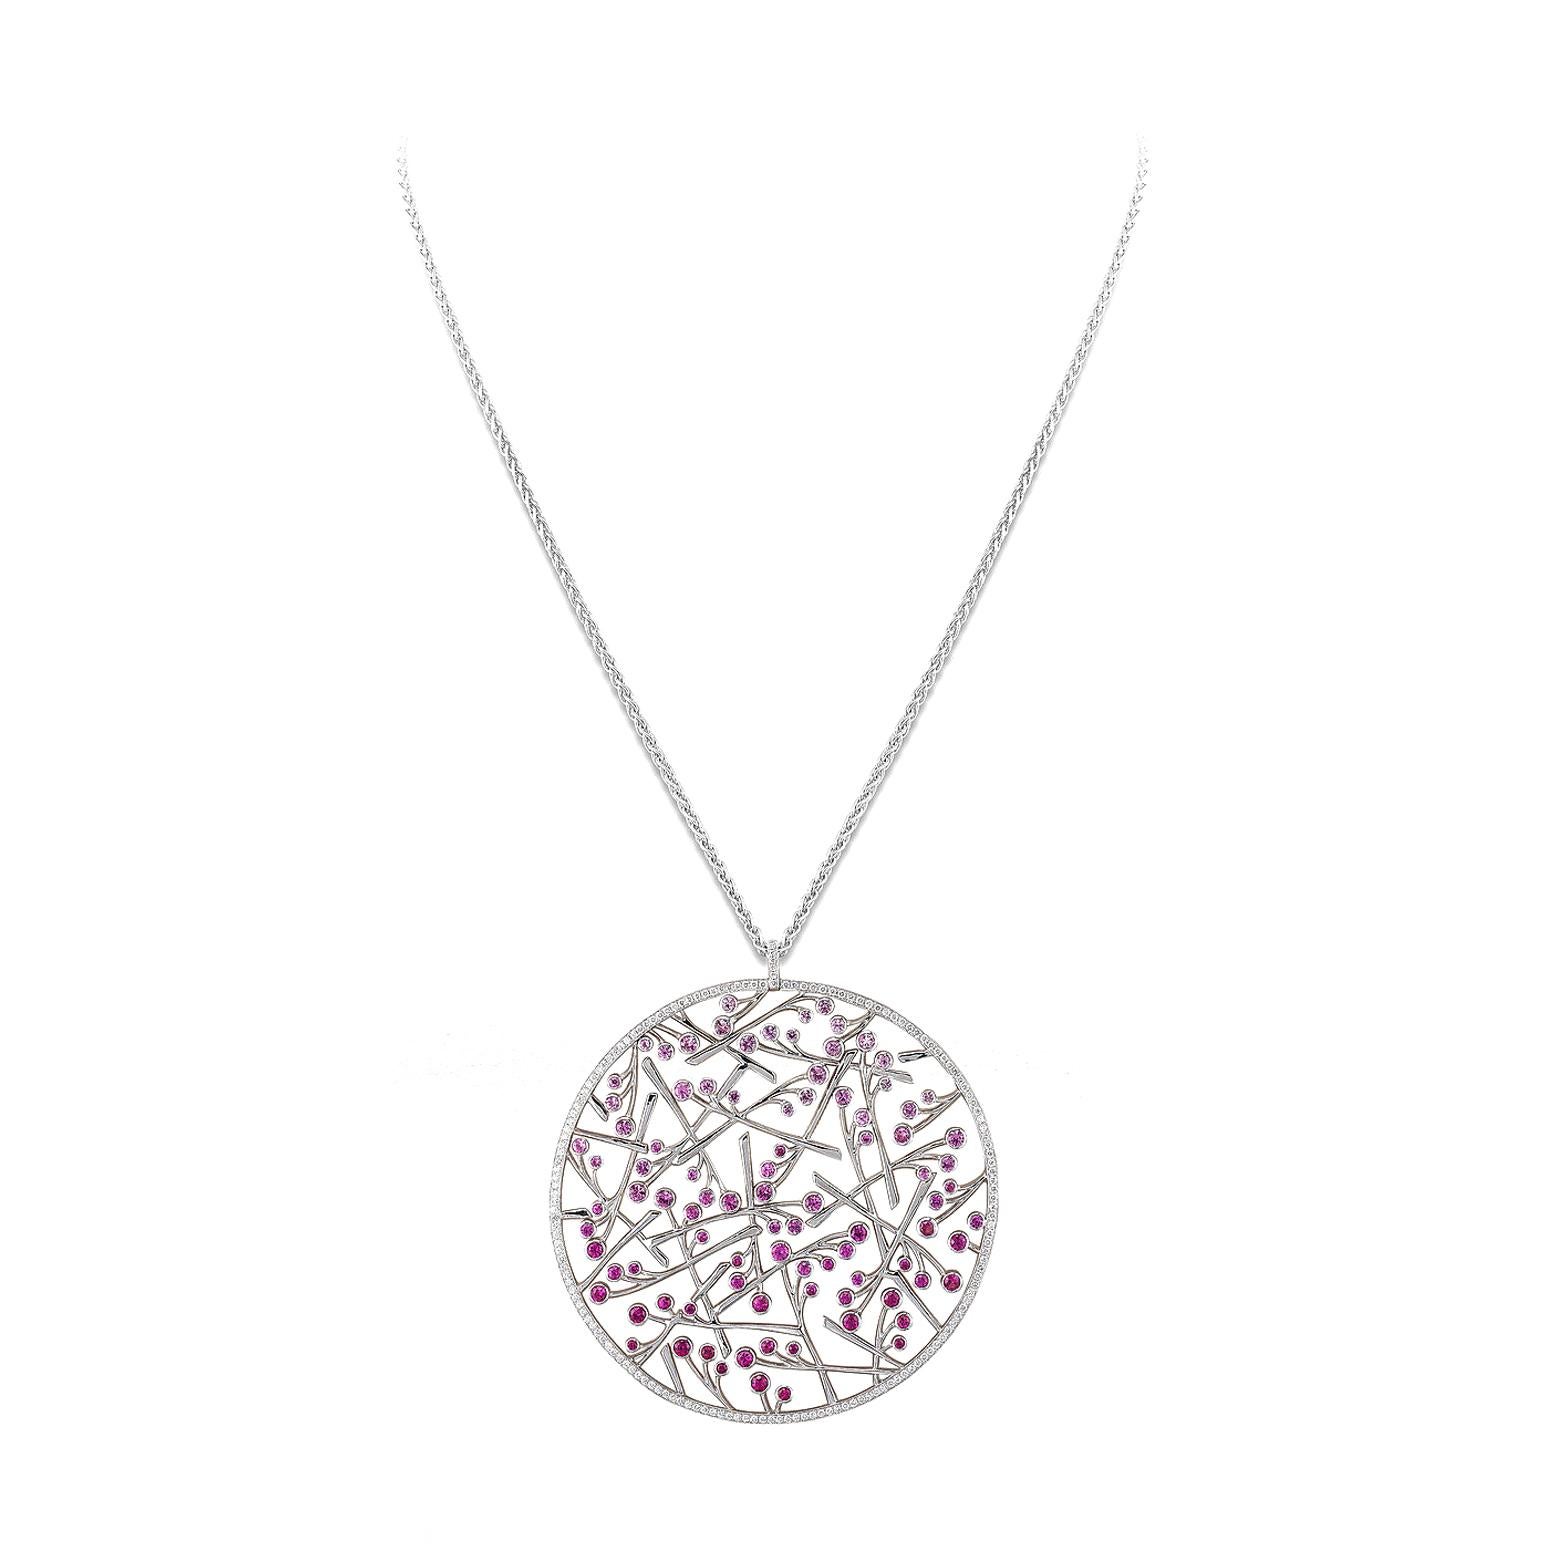 Pendant in 18kt white gold set with 80 pink sapphires 7.15 cts, 11 rubies 1.35 cts and 164 diamonds 1.98 cts        